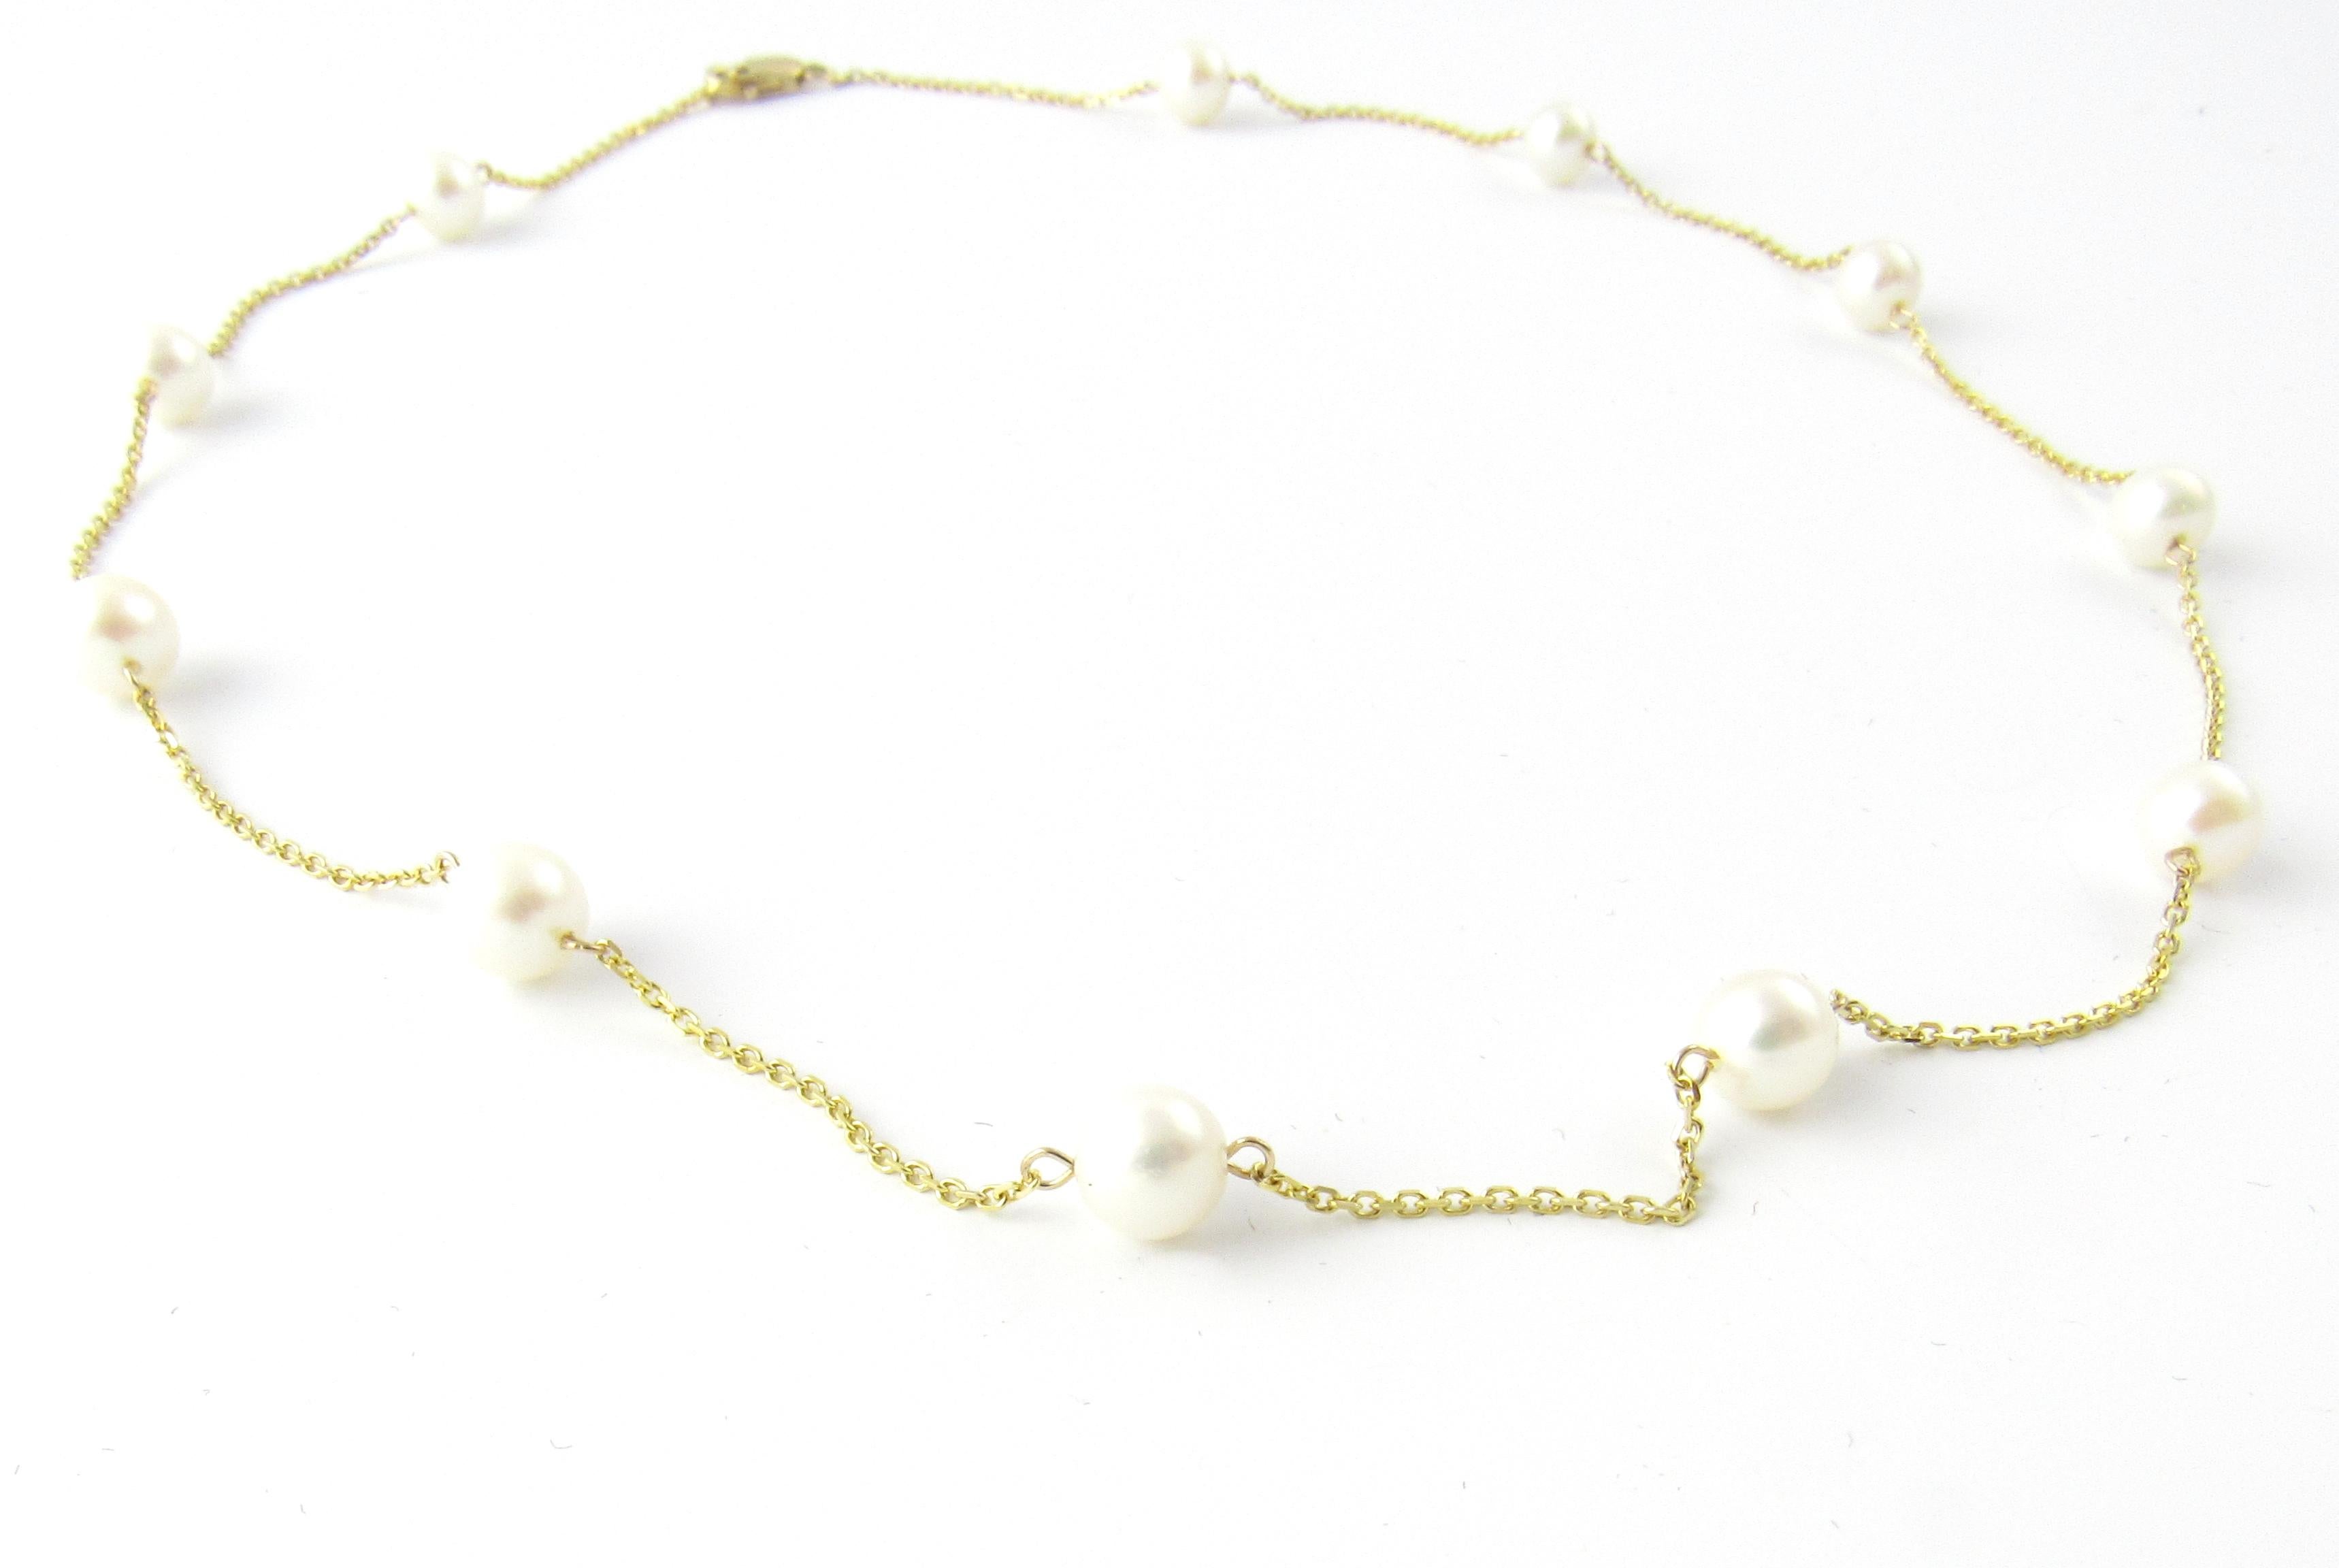 14 Karat Yellow Gold and Pearl Necklace-

This lovely necklace features 11 white pearls (6 mm each) on a classic 14K yellow gold necklace.  

Size:  15.5 inches  

Weight:  2.7 dwt. /  4.2 gr. 

Stamped: 585

Very good condition, professionally